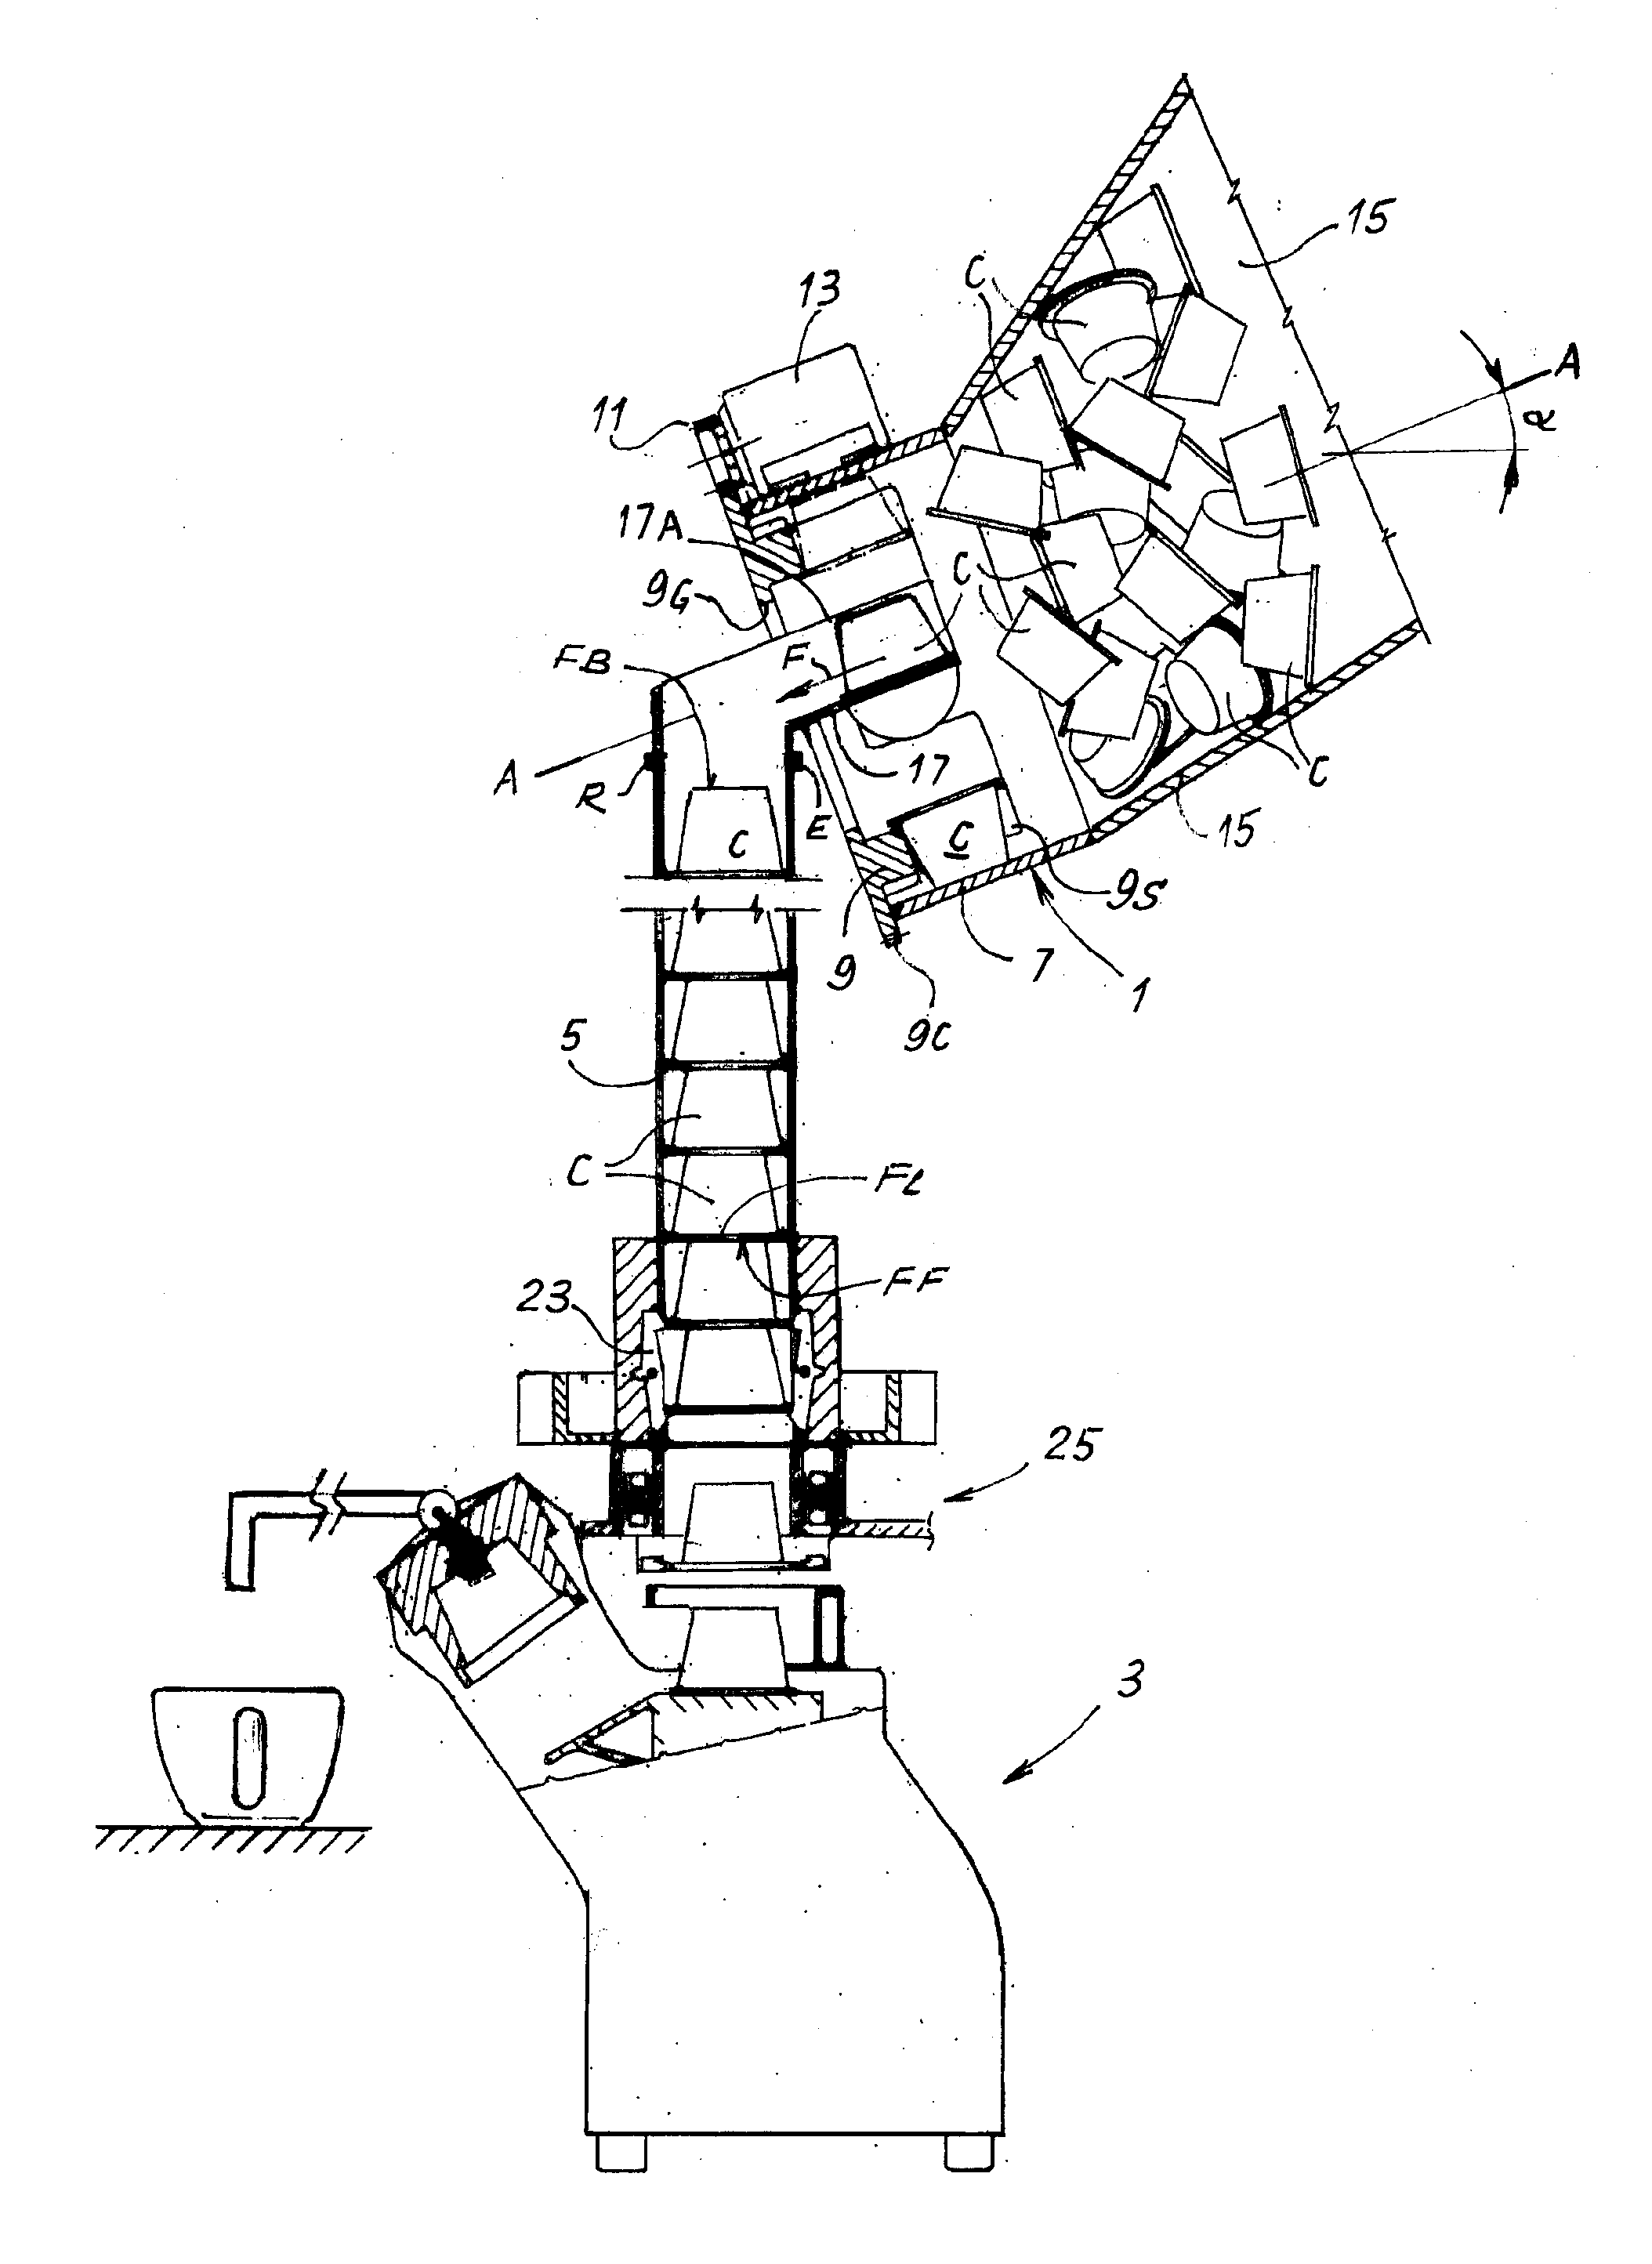 Device for orienting capsules in a beverage producing machine